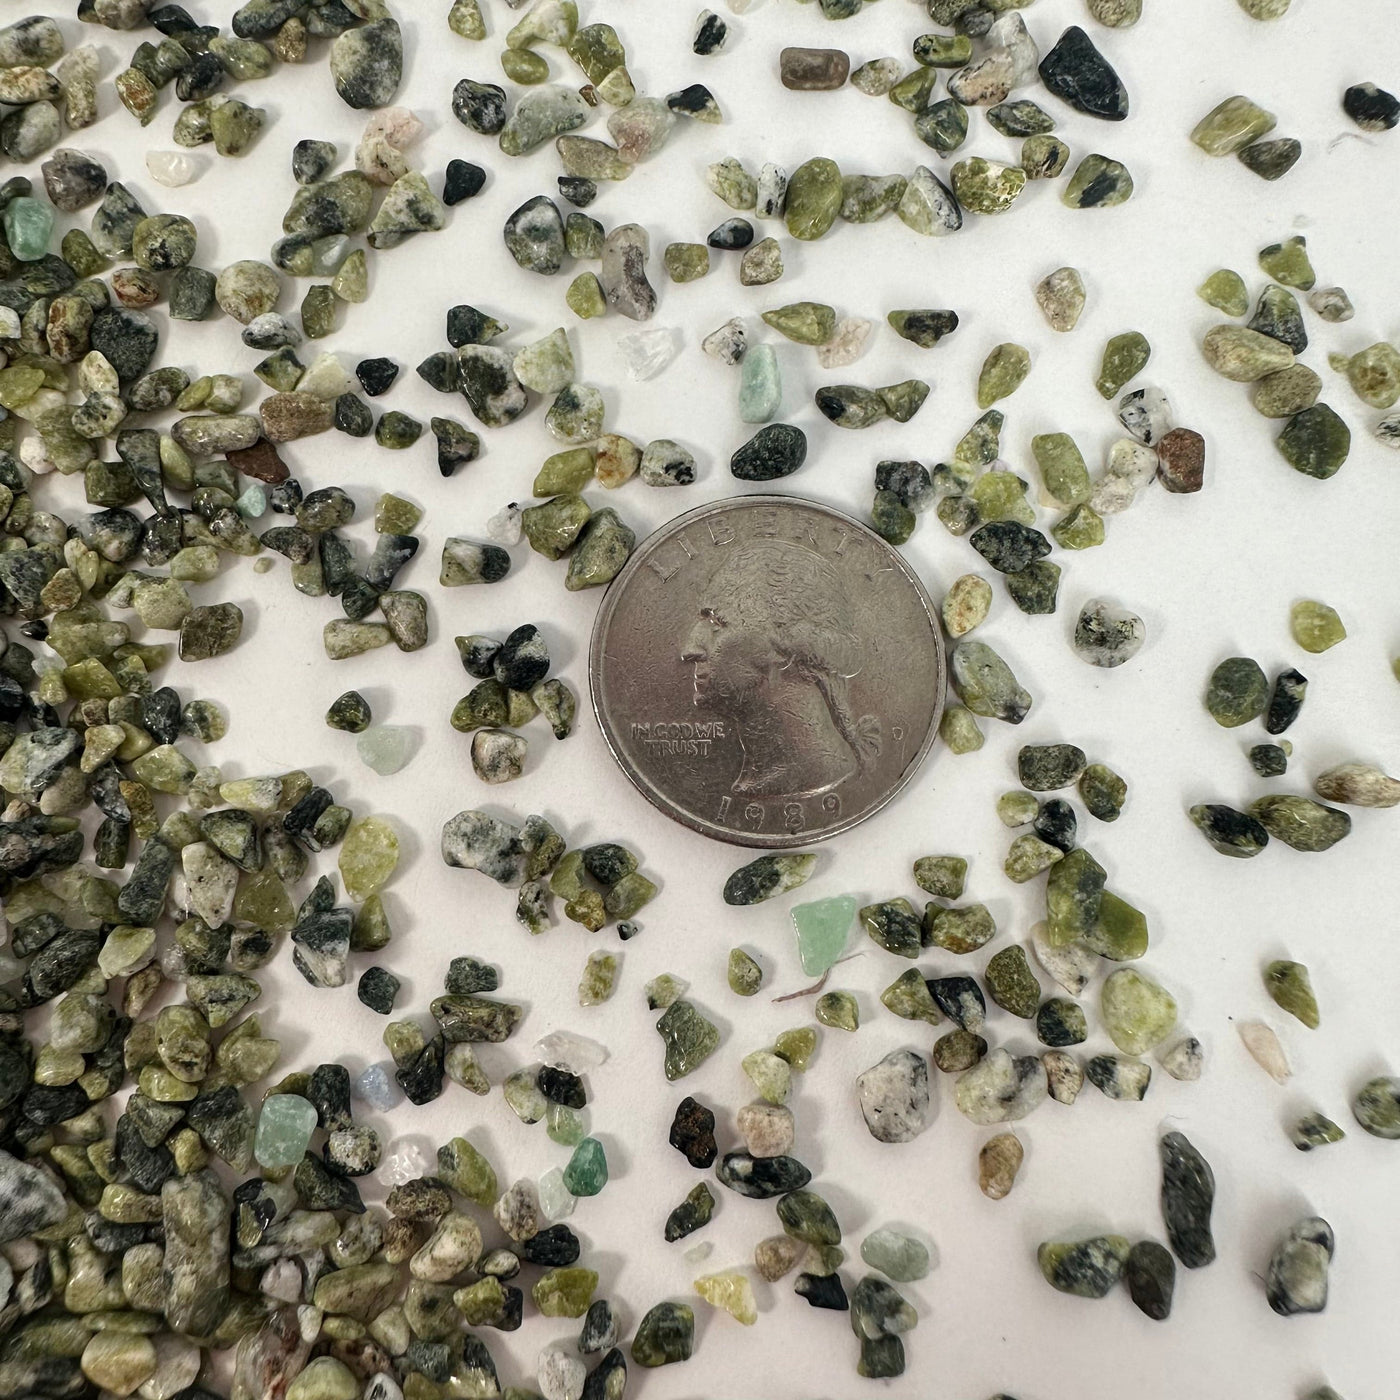  Serpentine 1Lb Bag - Tiny Chips - with quarter for size reference 